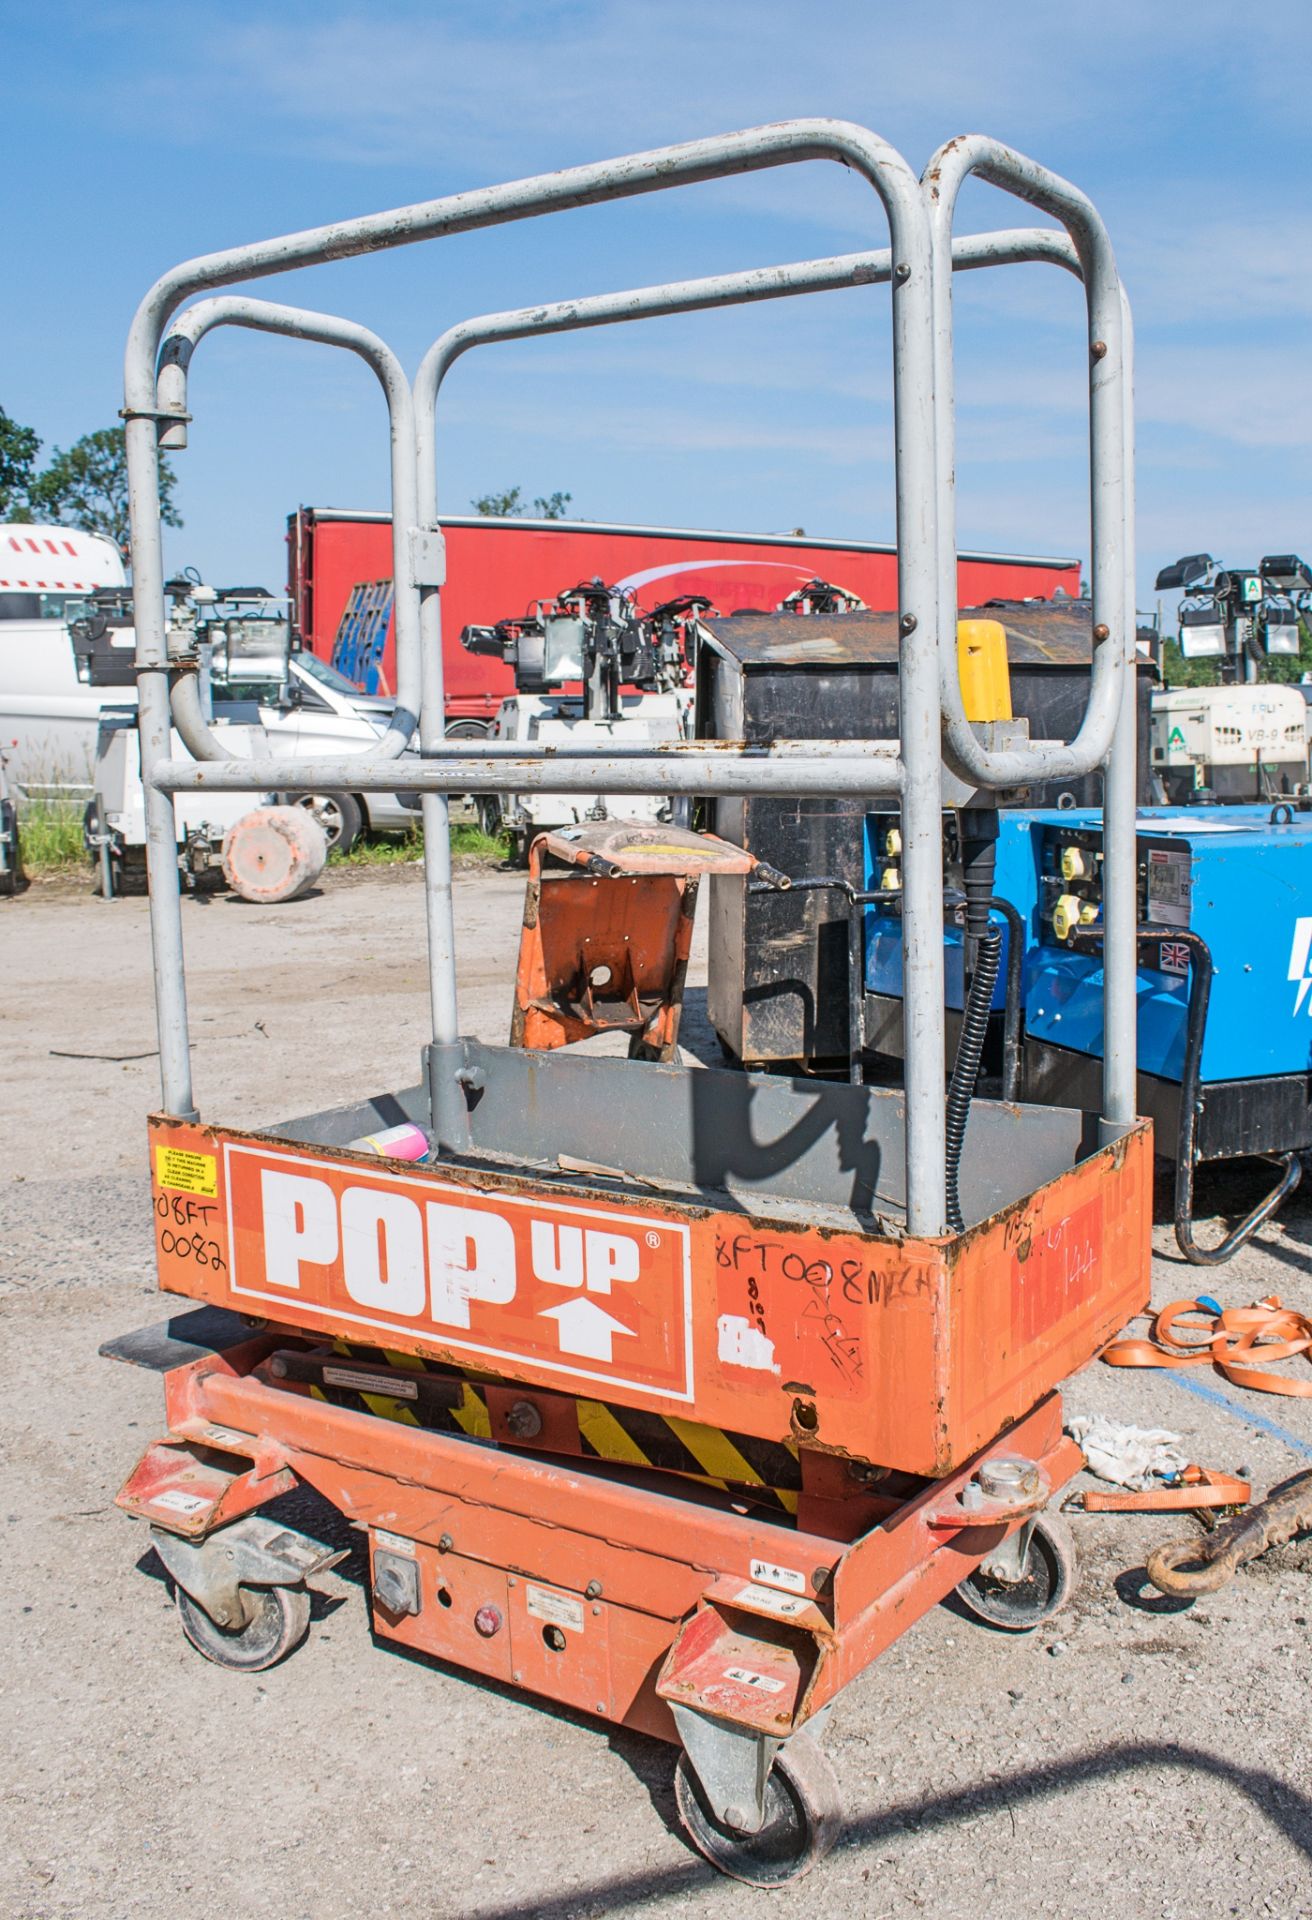 Pop-Up battery electric mobile scissor lift 08FT0008 - Image 2 of 2